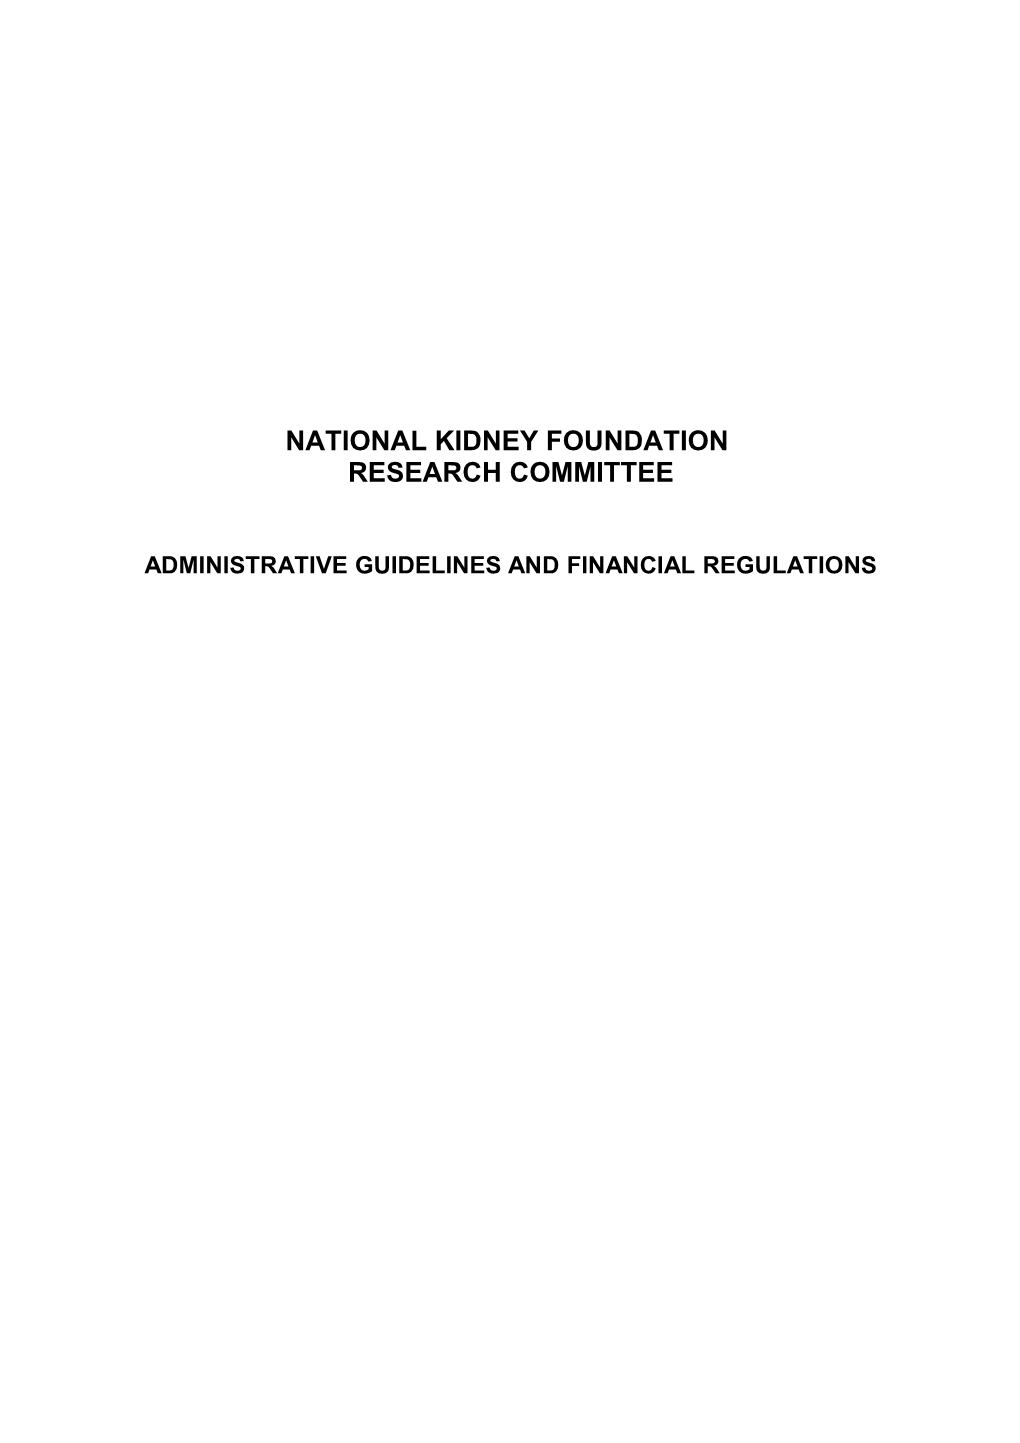 Administrative Guidelines and Financial Regulations